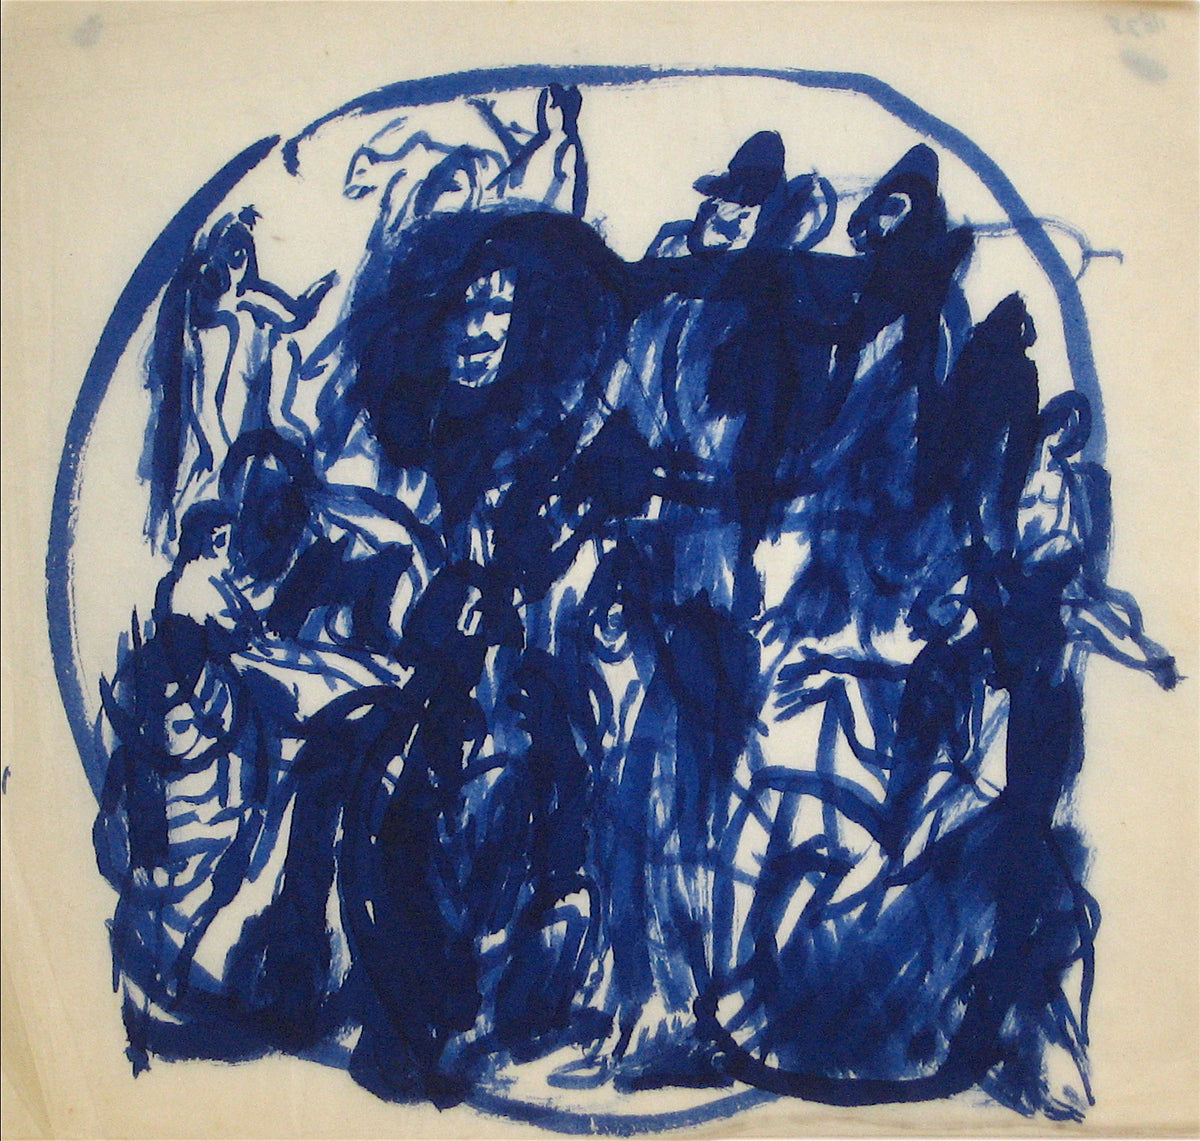 Blue Figures in a Circle&lt;br&gt;Early-Mid 20th Century Ink Wash&lt;br&gt;&lt;br&gt;#11828